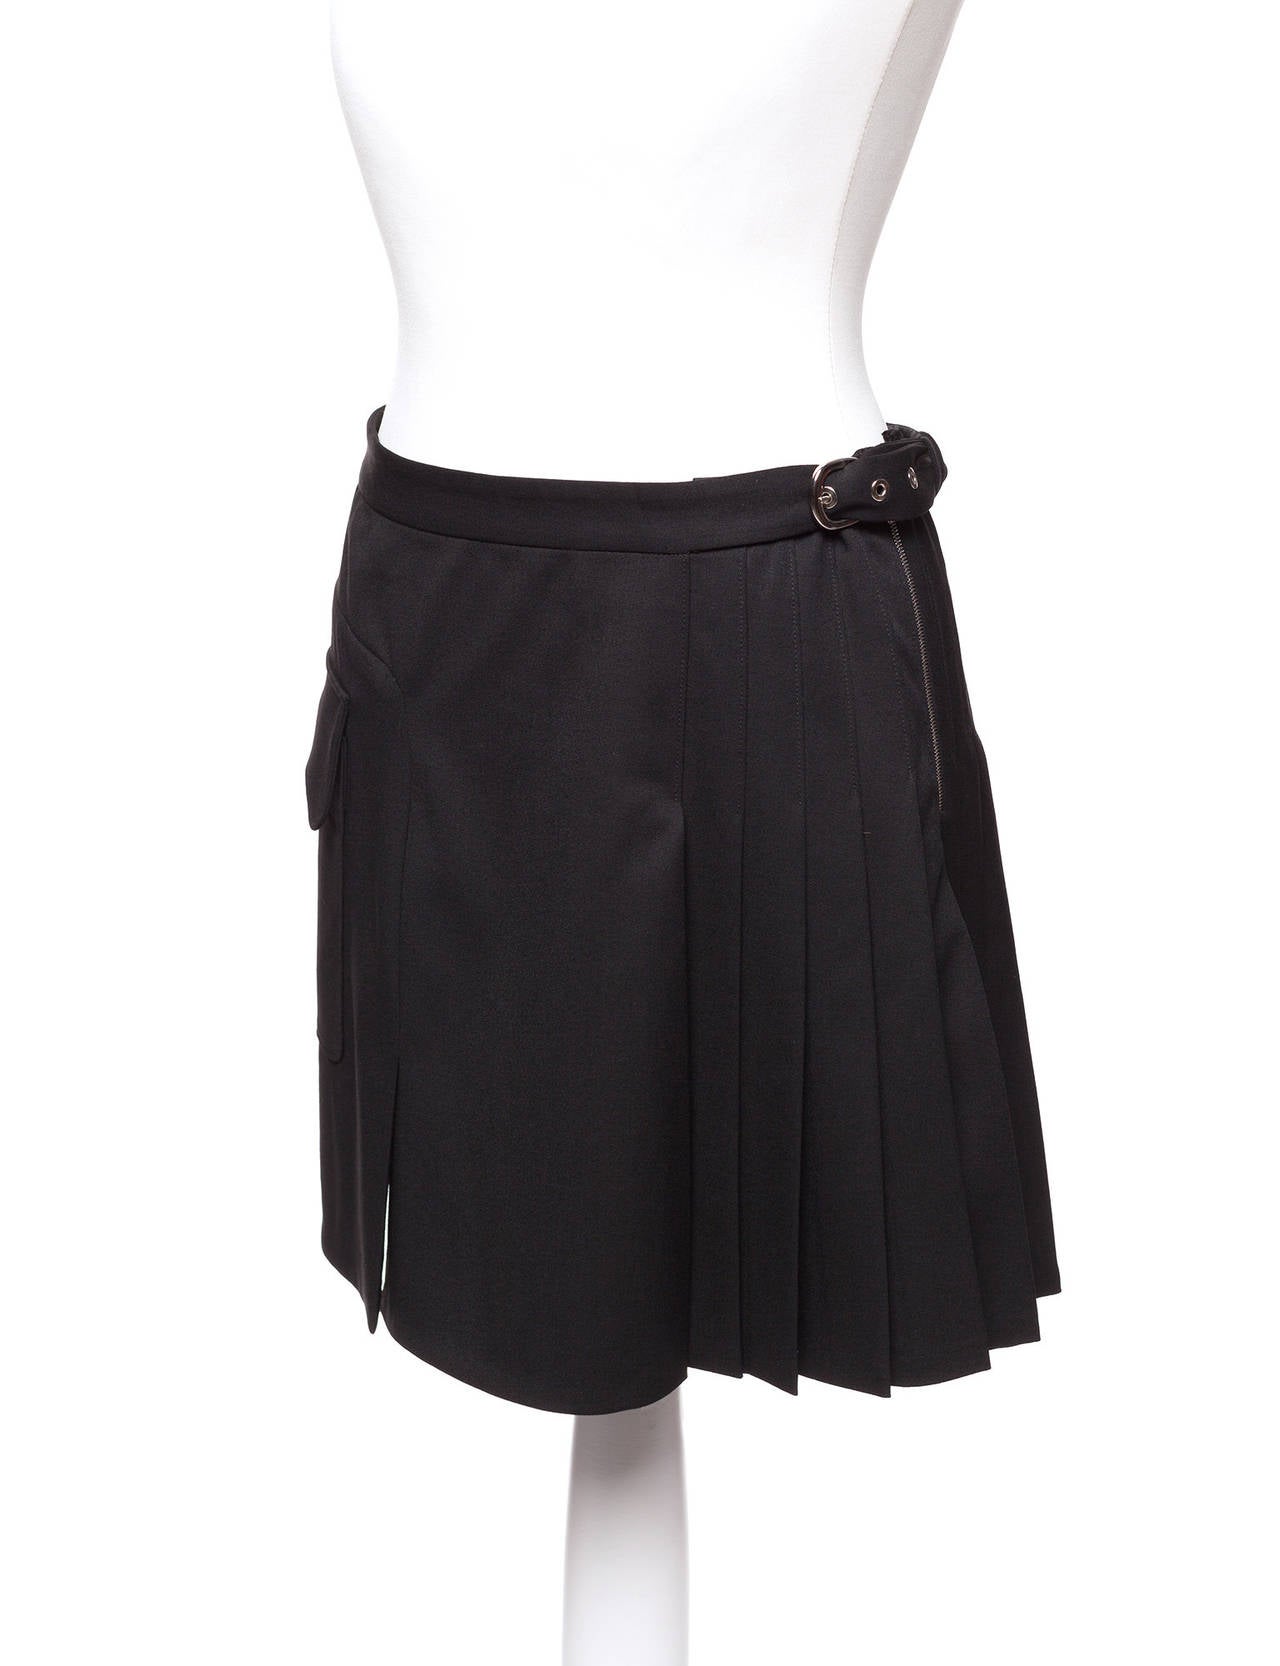 Balenciaga by Nicolas Ghesquire pleated cargo mini skirt with side belt buckle, large side pocket and fun pleated detail. Size French 40, German 36, US 8.